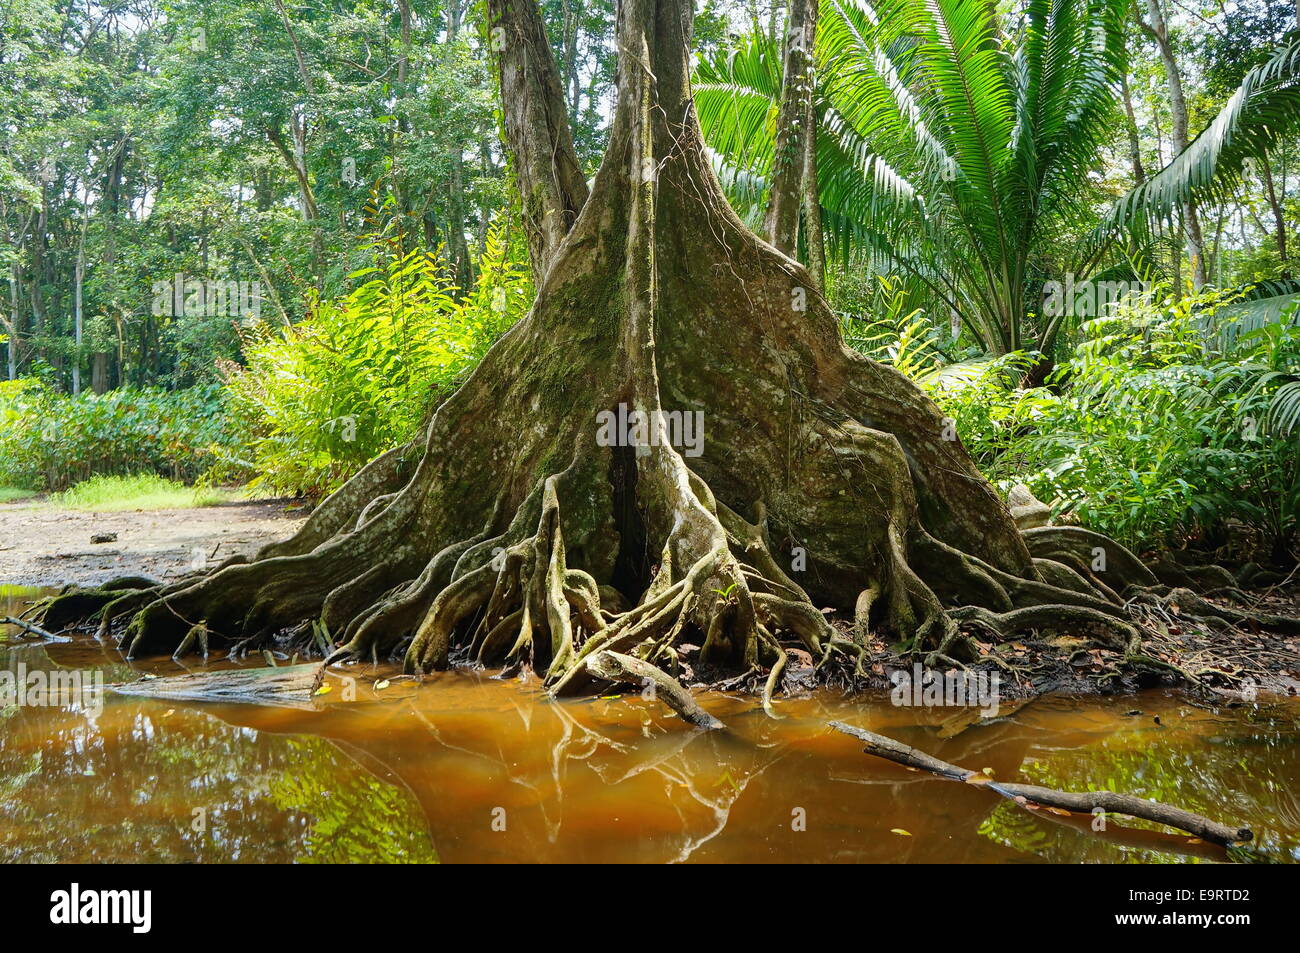 Tropical tree with buttress roots at the edge of a swamp in the jungle of Costa Rica Stock Photo